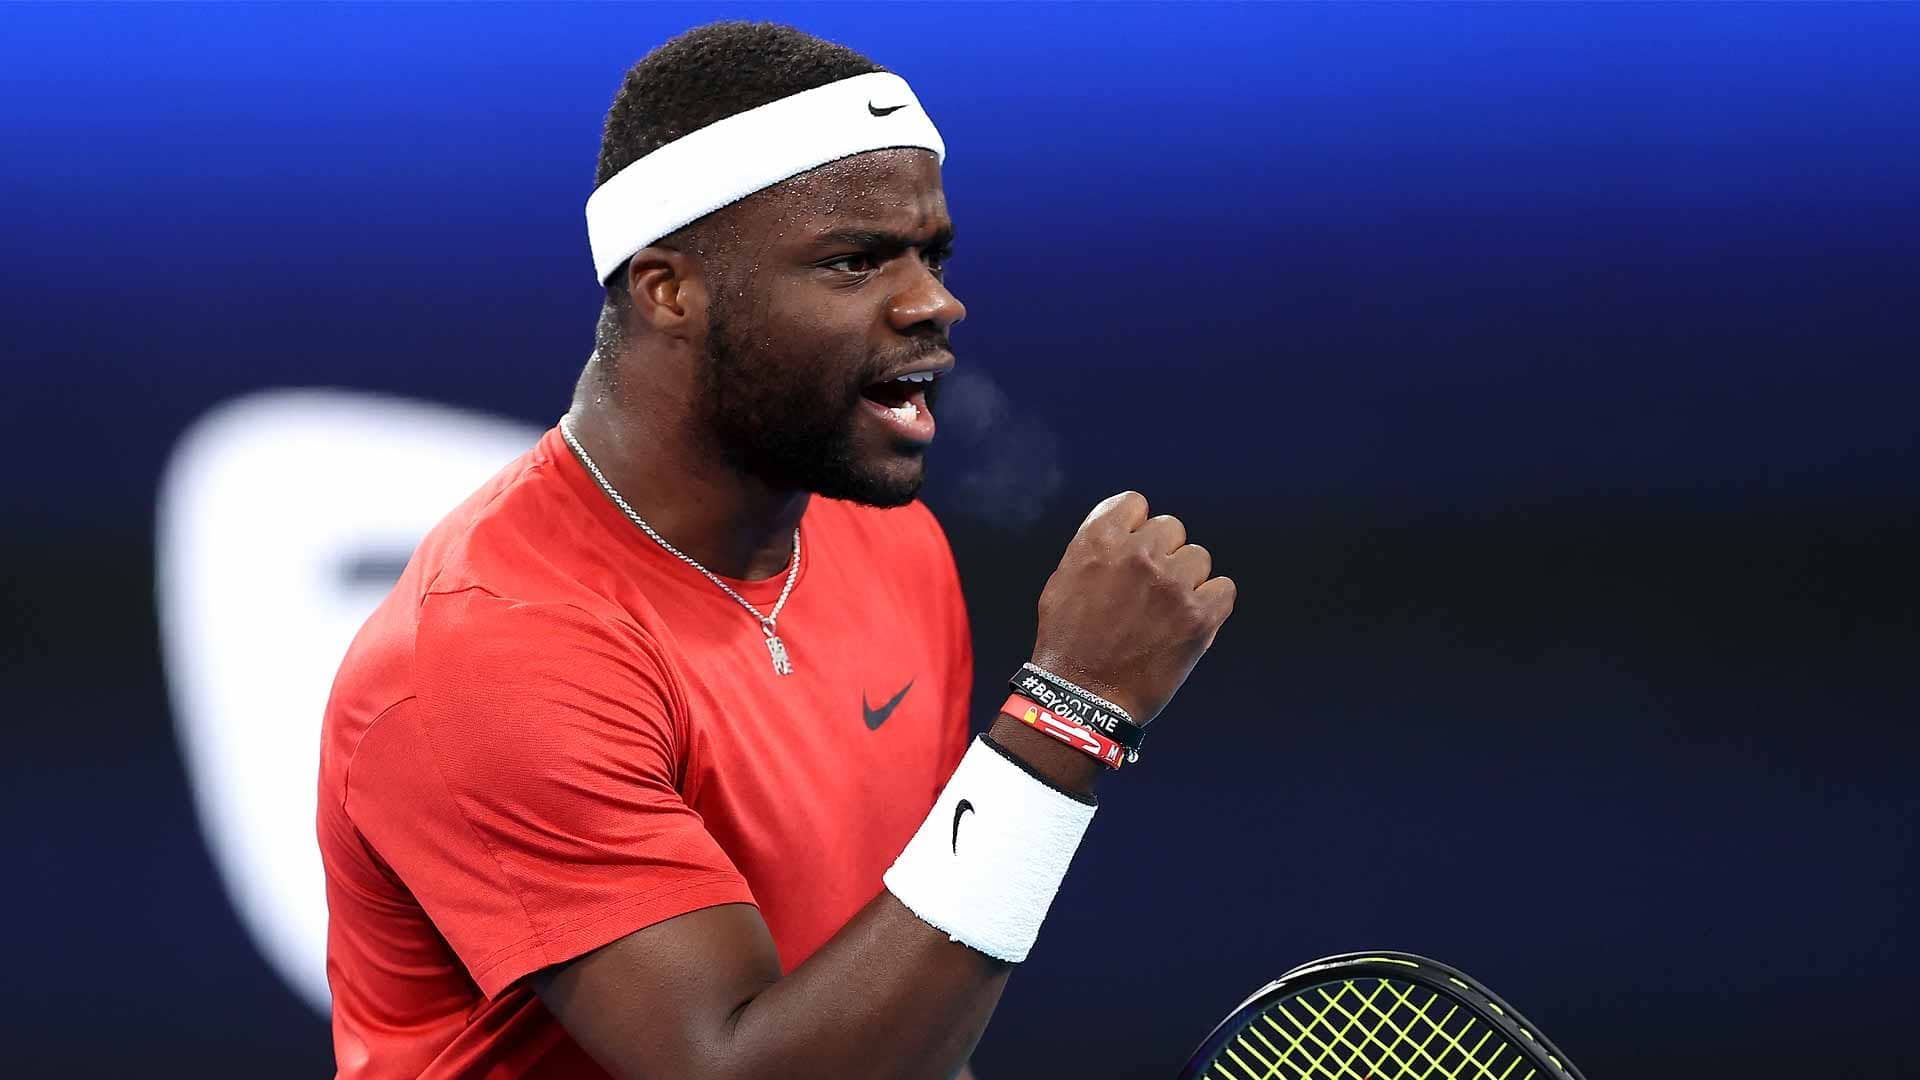 Frances Tiafoe downs Kacper Zuk in straight sets on Friday afternoon in Sydney.